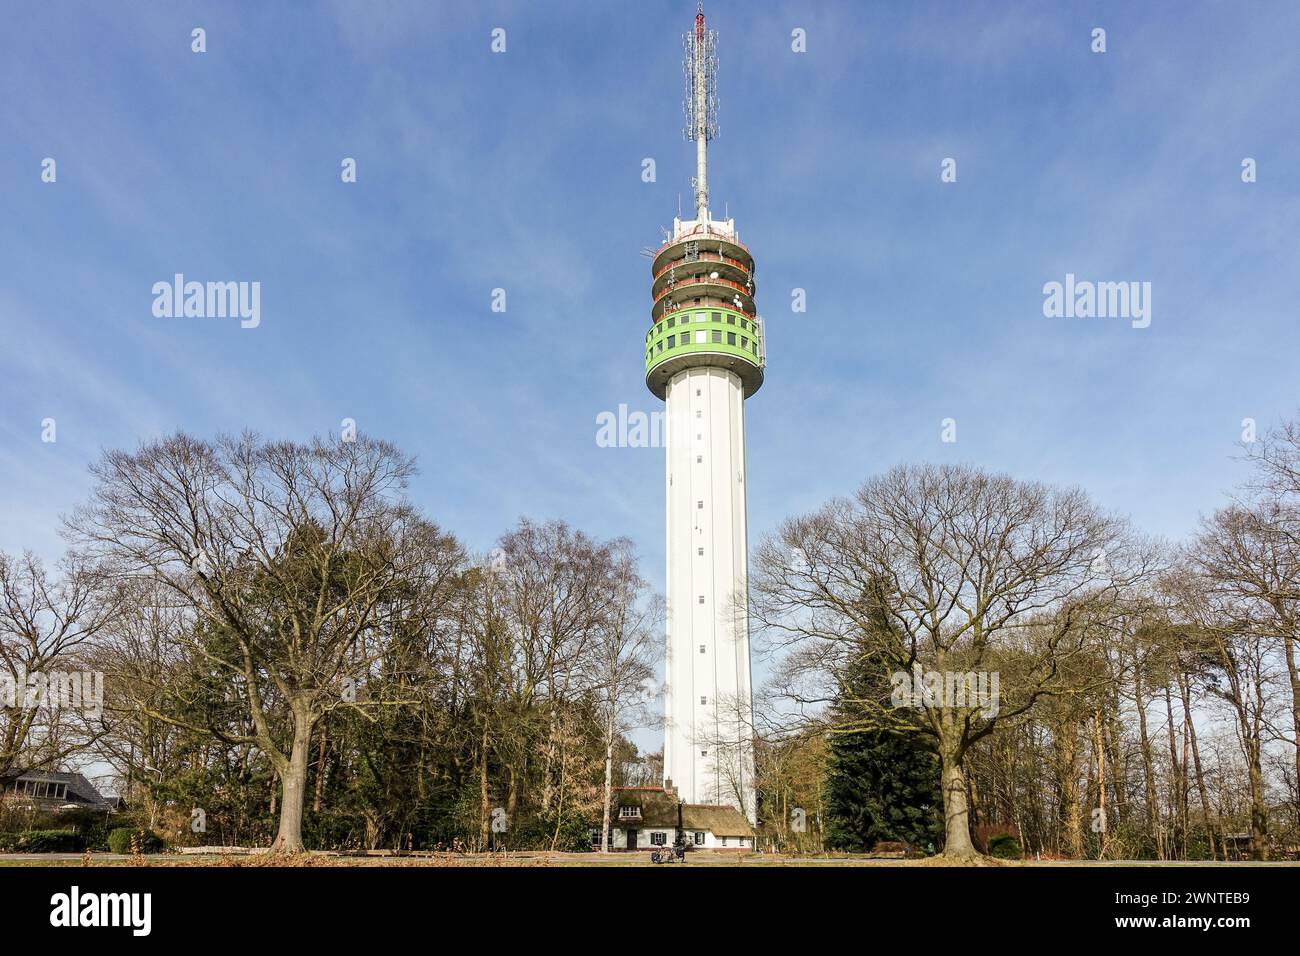 A telecommunications tower (Zendmast Markelo, tallest building in Overijssel) with antennas and dishes against a clear blue sky, surrounded by trees. Stock Photo